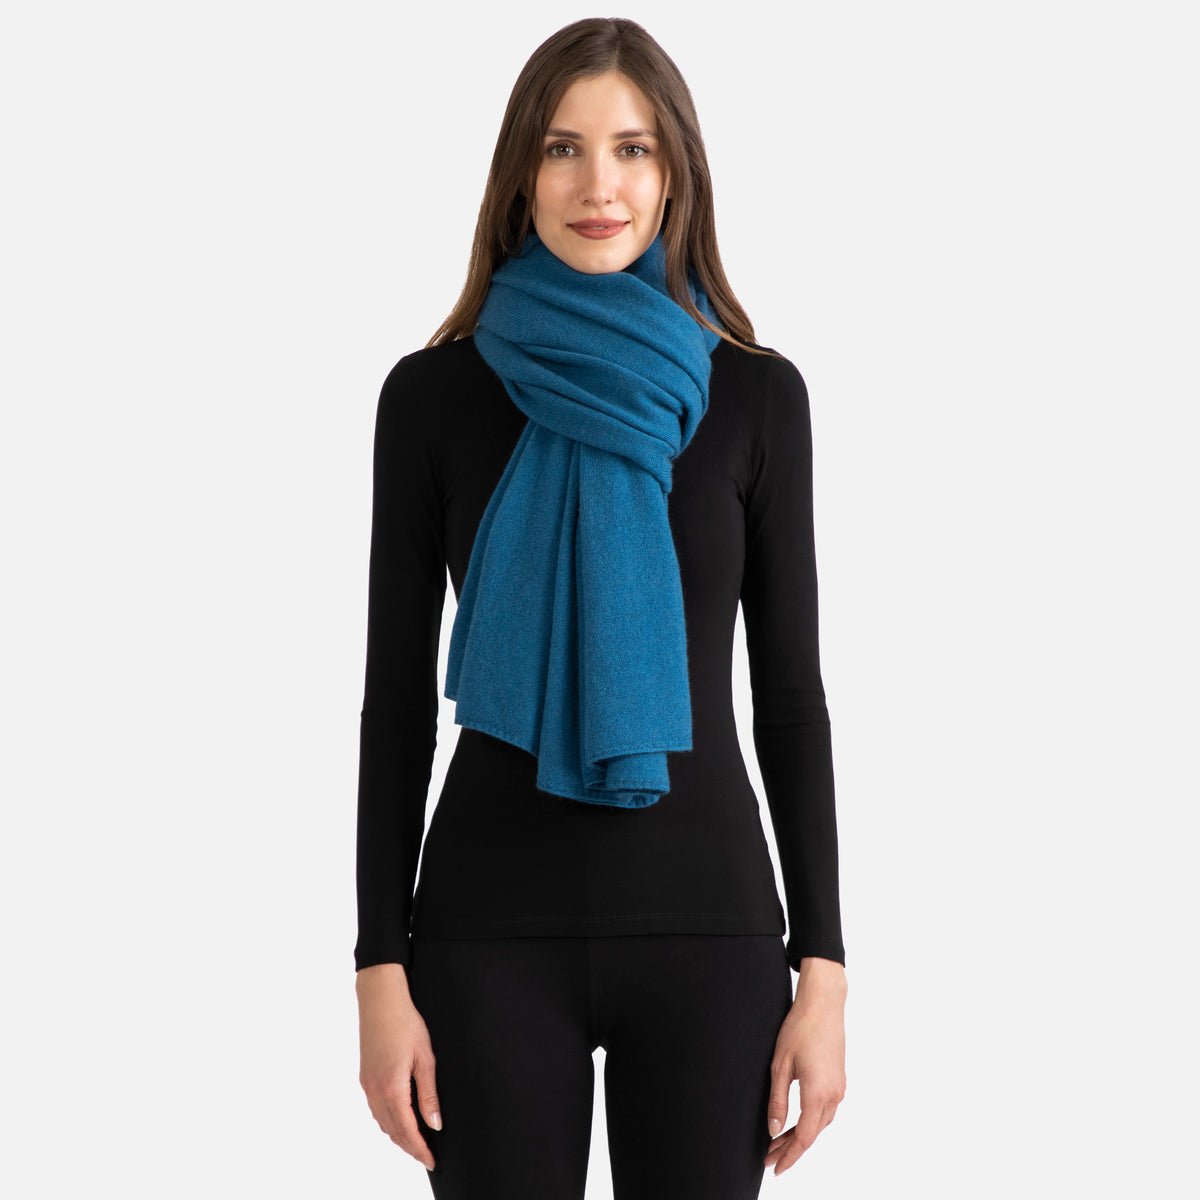 Picture of a woman wearing a teal cashmere jersey knitted oversize scarf or travel wrap.